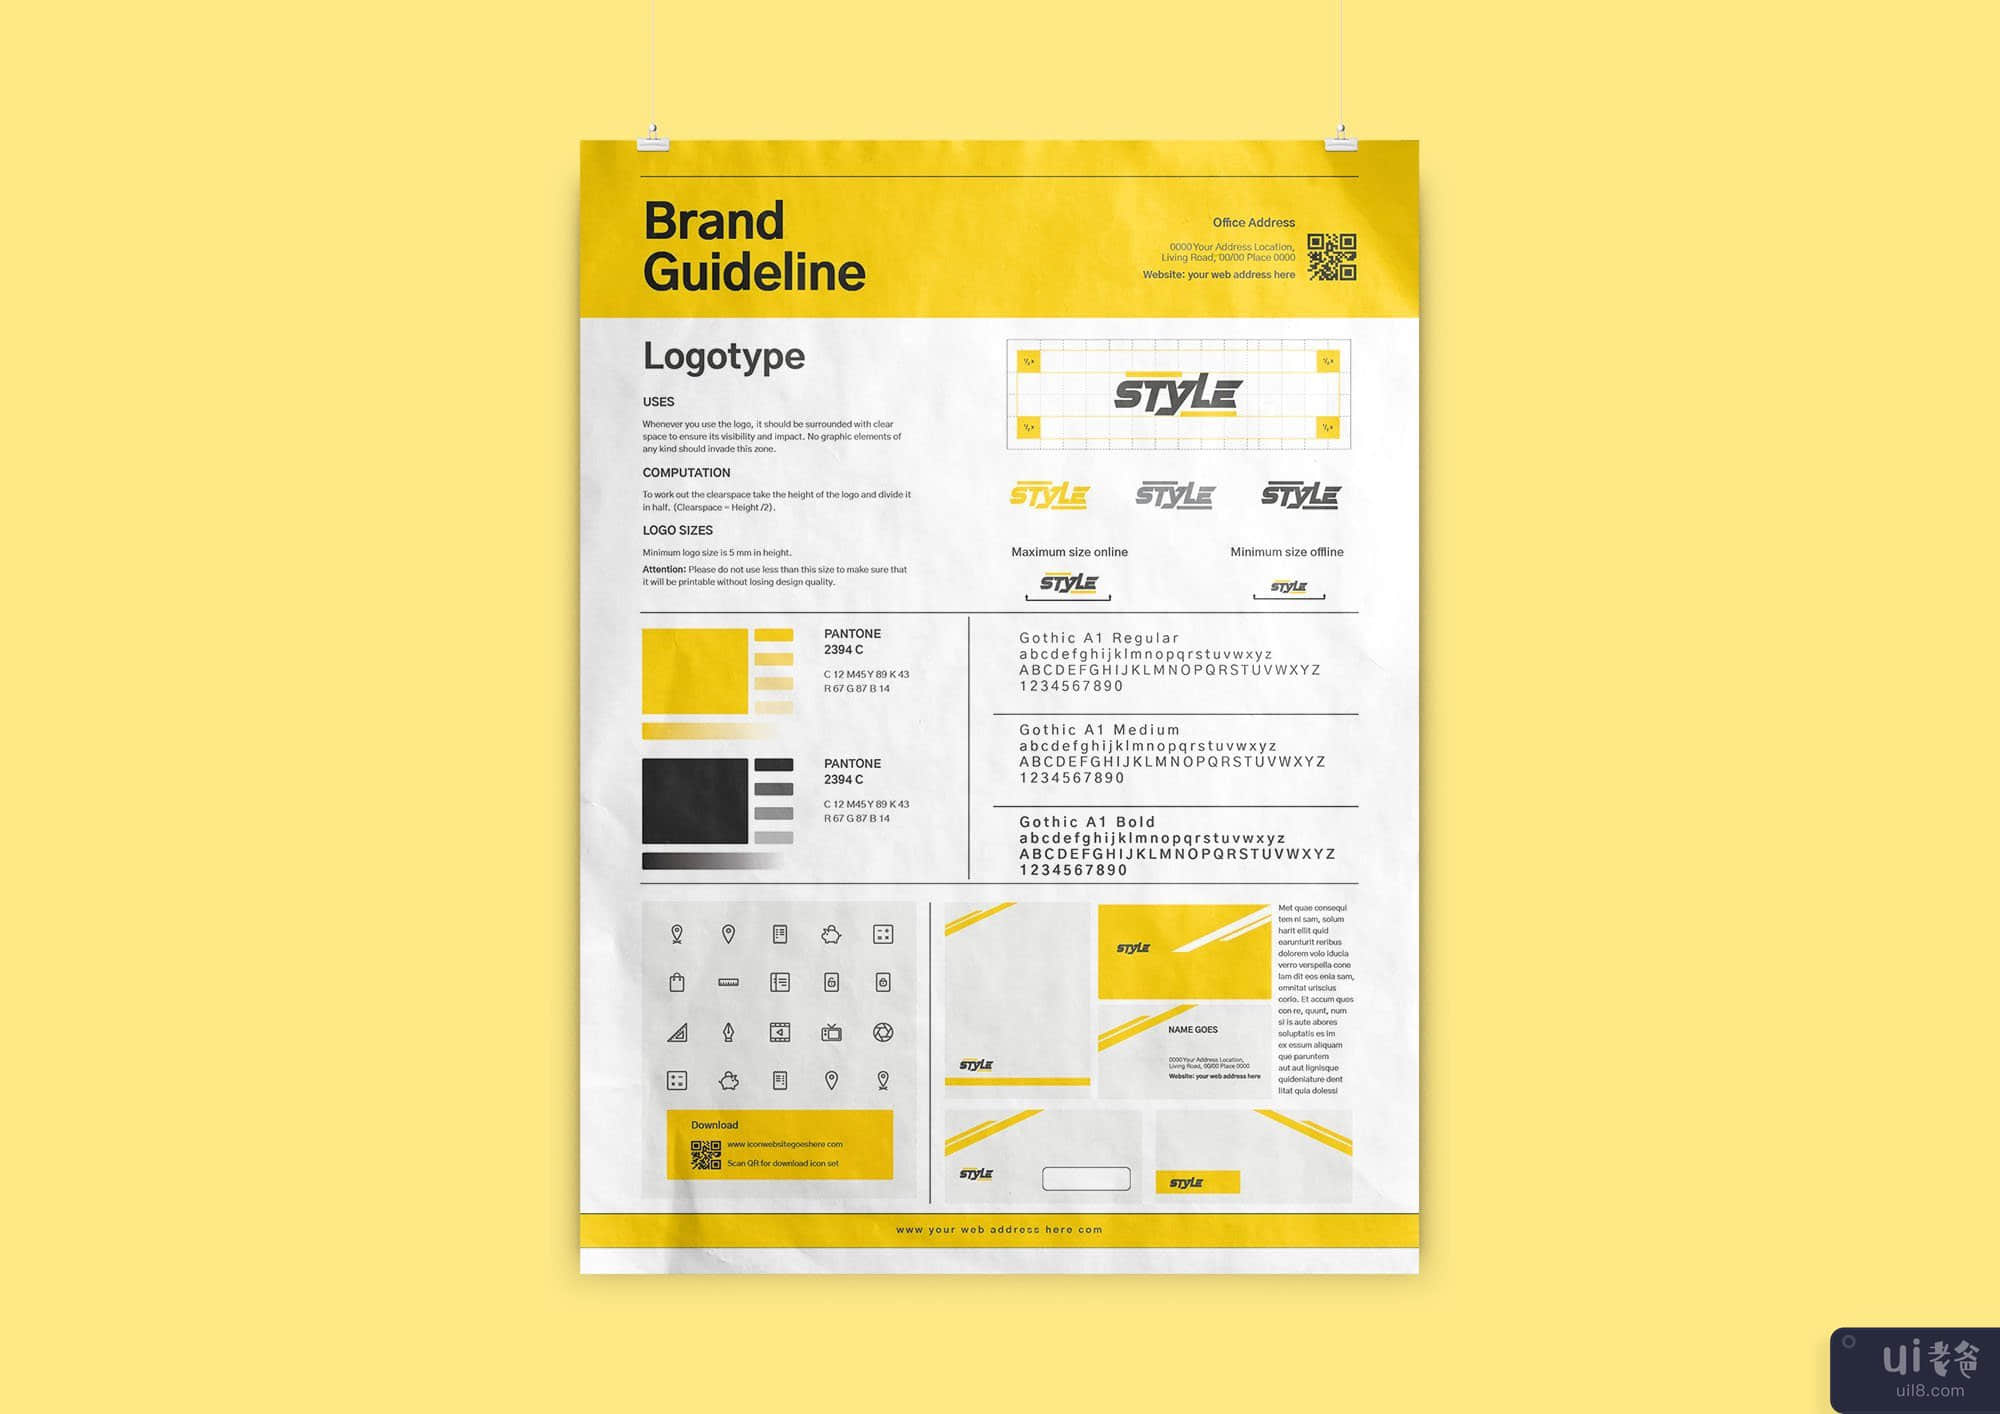 A3 品牌指南海报 Din A3 品牌指南海报(A3 Brand Guideline poster Din A3 Brand Guideline poster)插图4